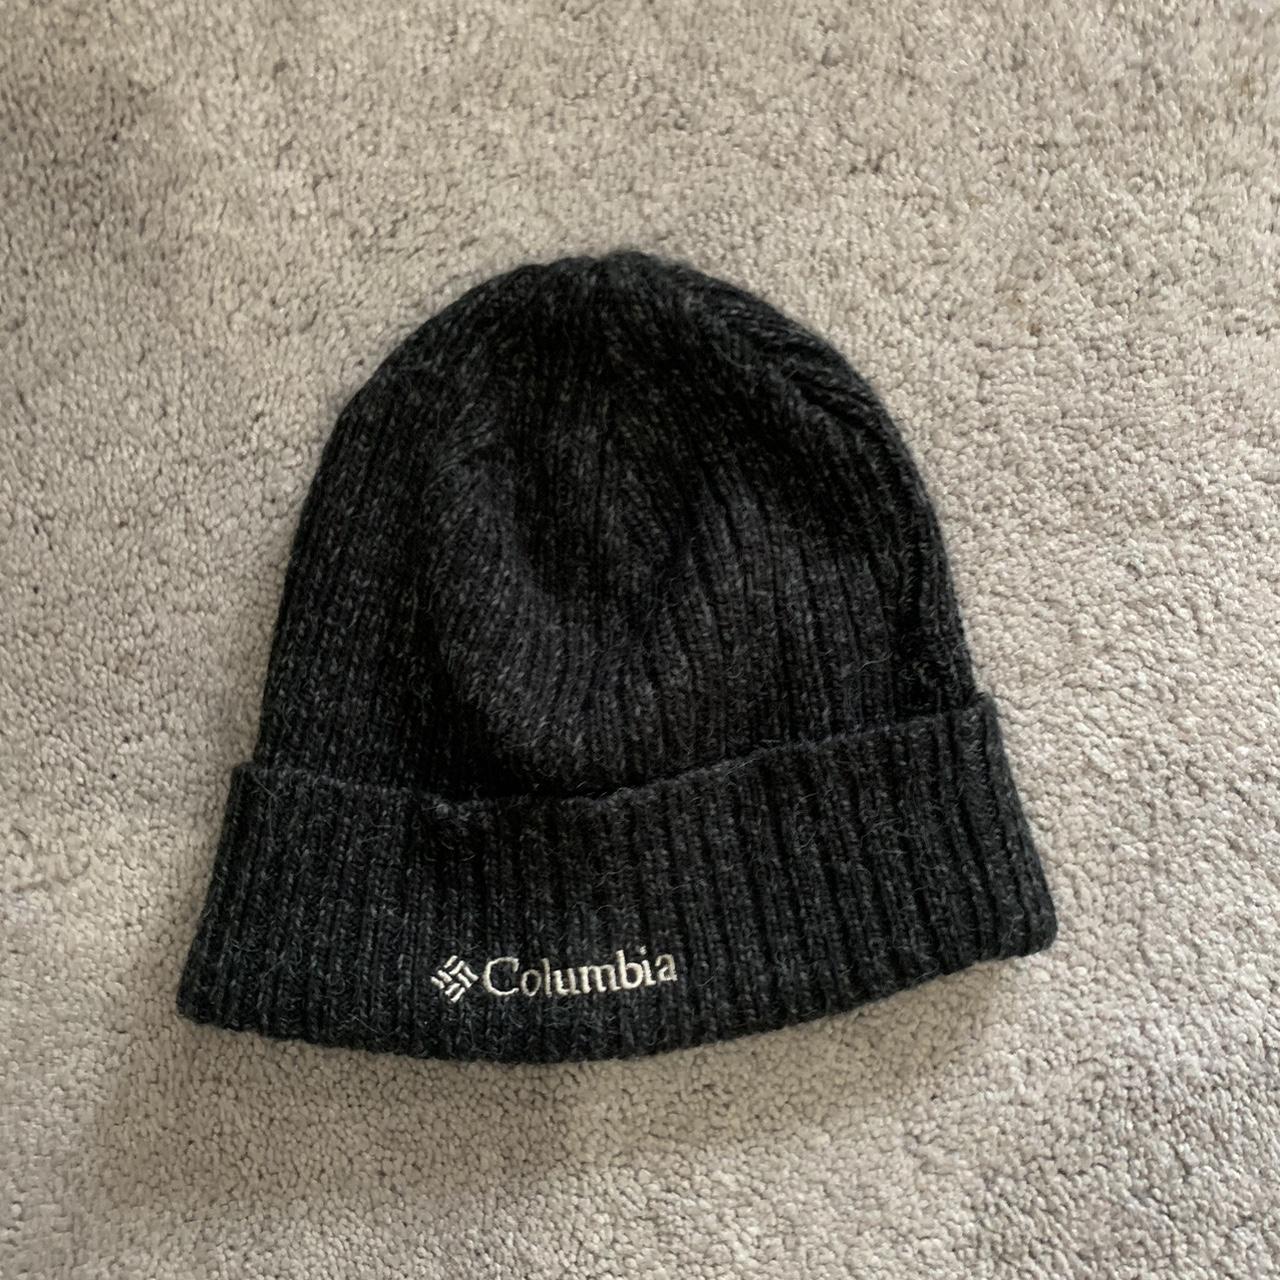 Columbia Beanie, Great Condition